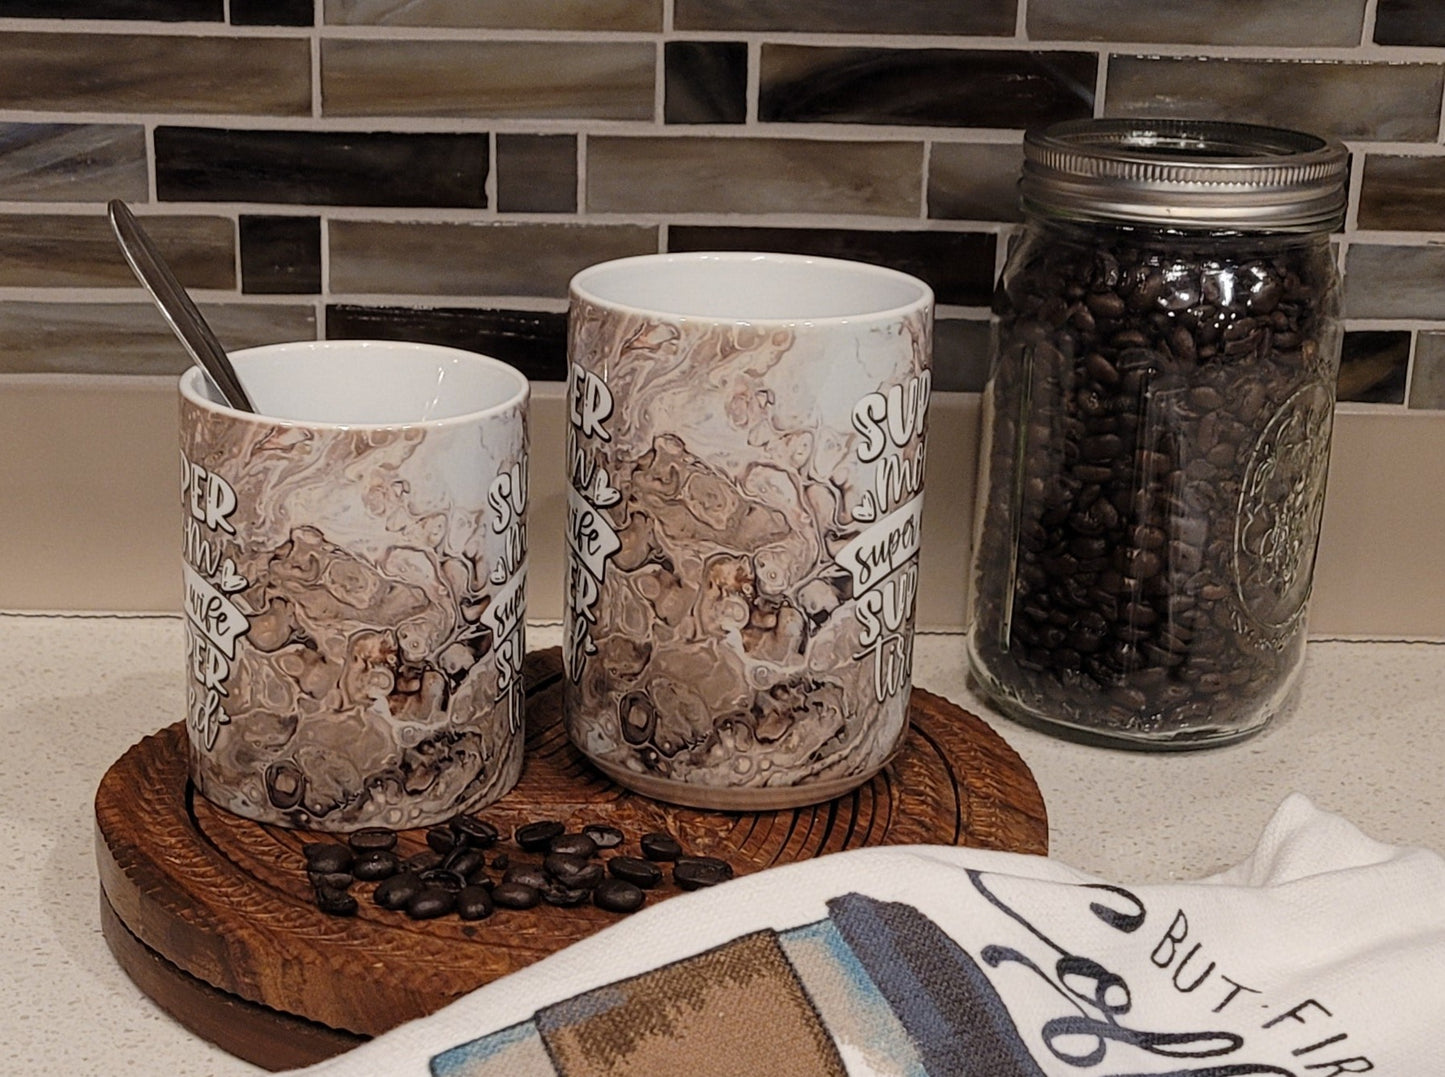 Mother's Day Coffee Mugs with Brown Abstract Art Design, Coffee First Mom Later, Super Mom Super Wife Super Tired